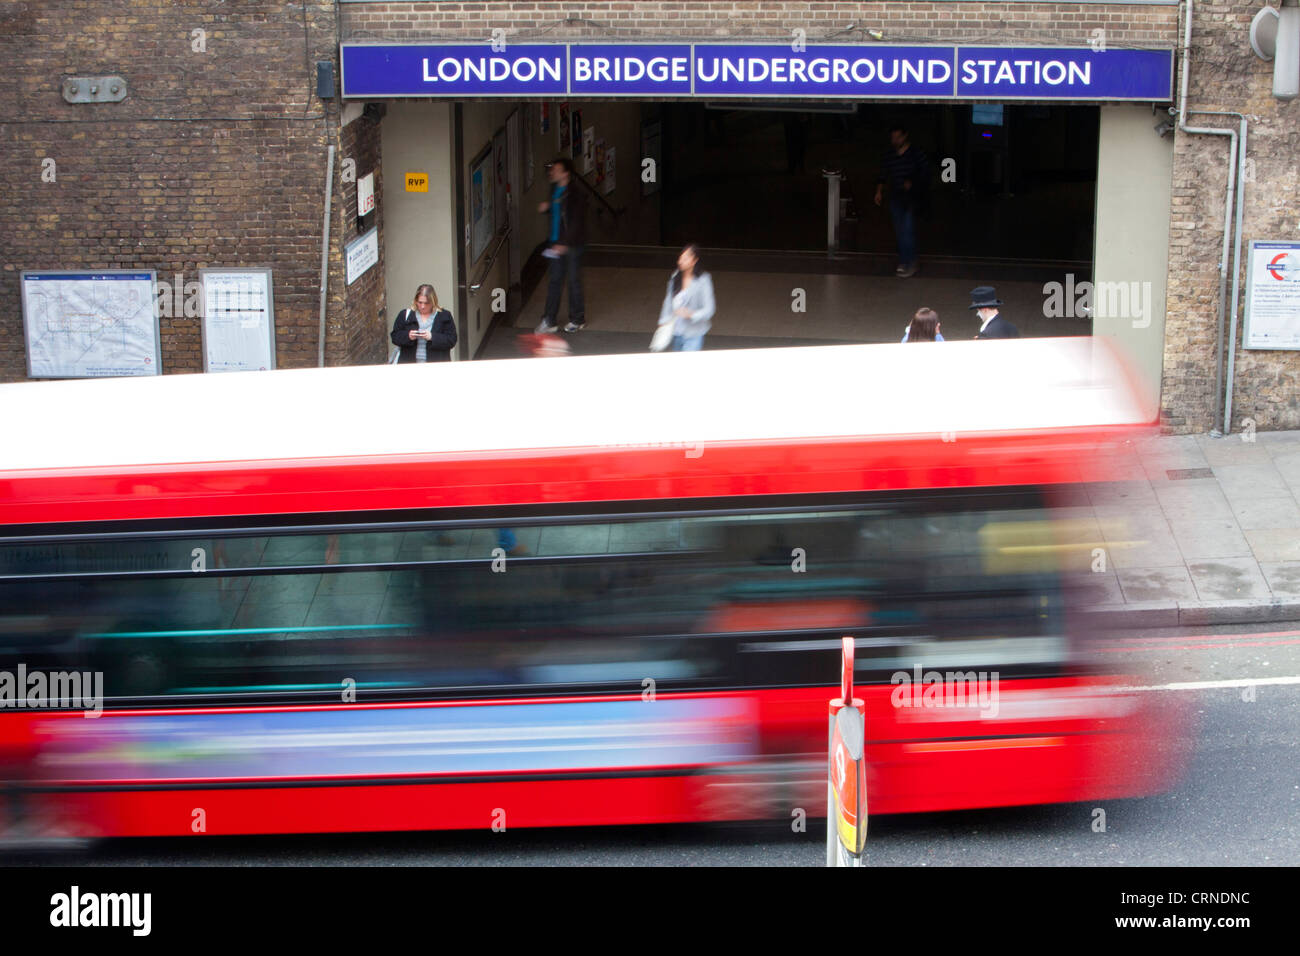 A red London bus passing an entrance to London Bridge Underground Station. Stock Photo